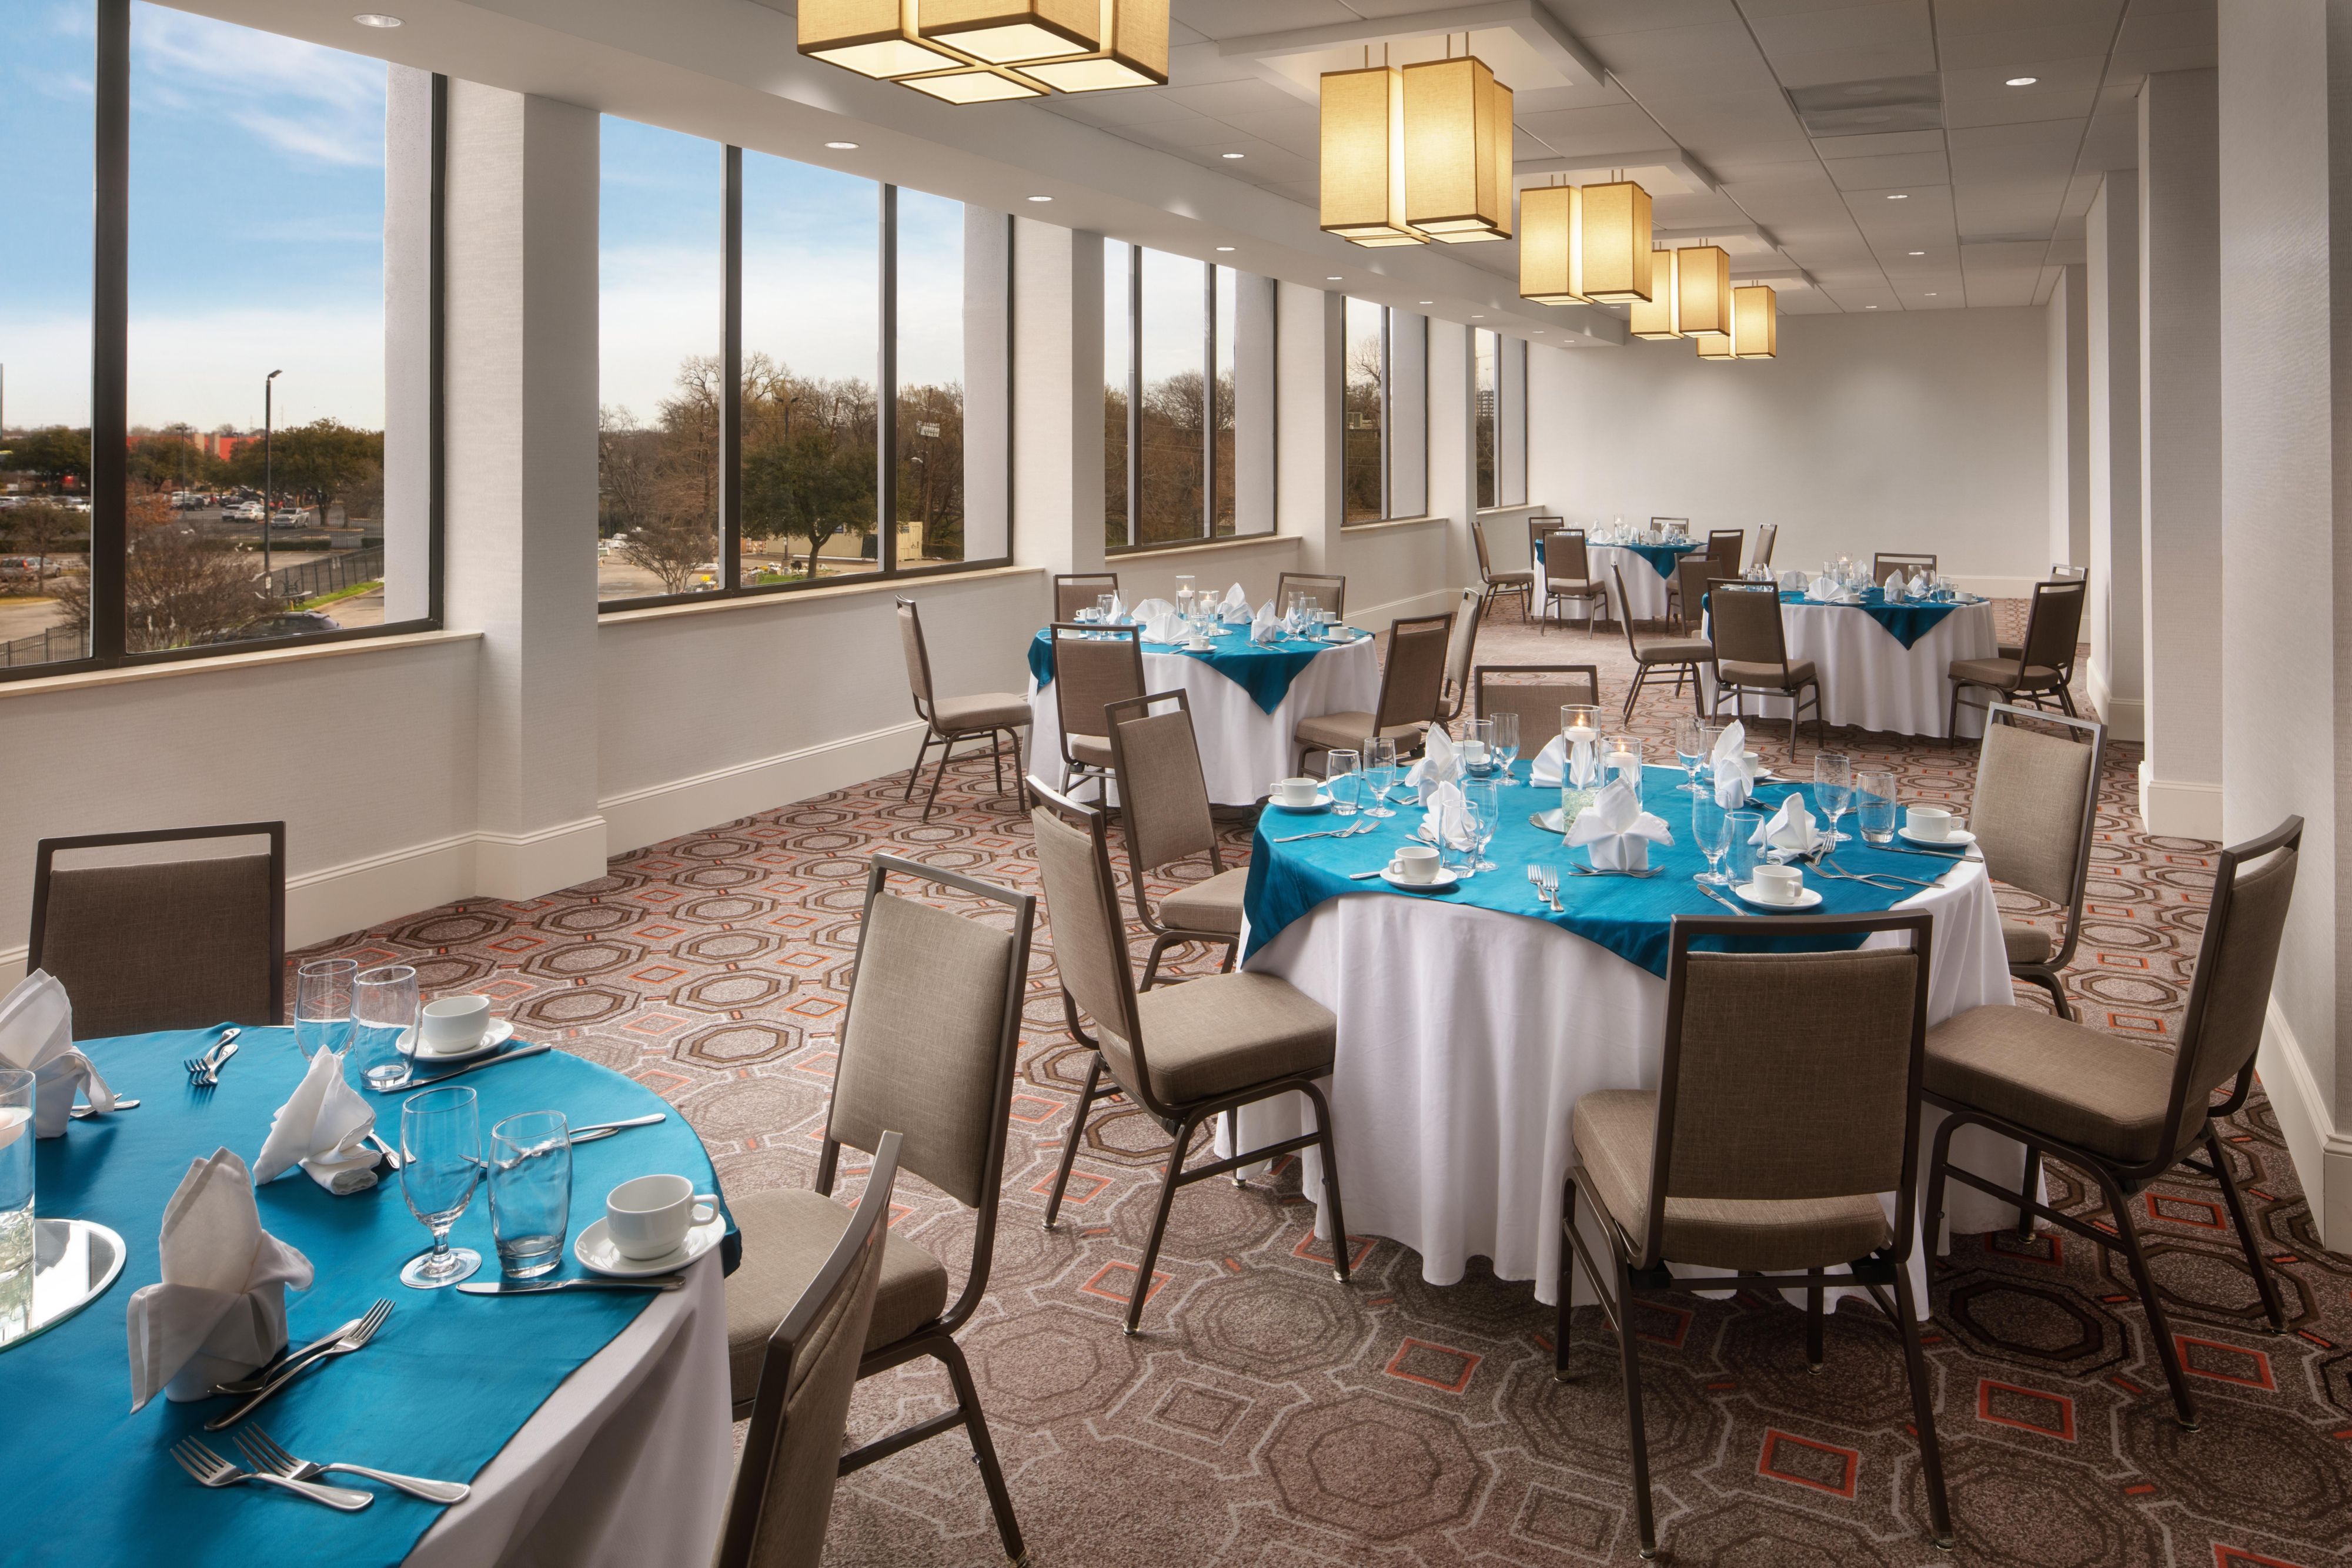 Host your event in our refreshed meeting space with natural light.